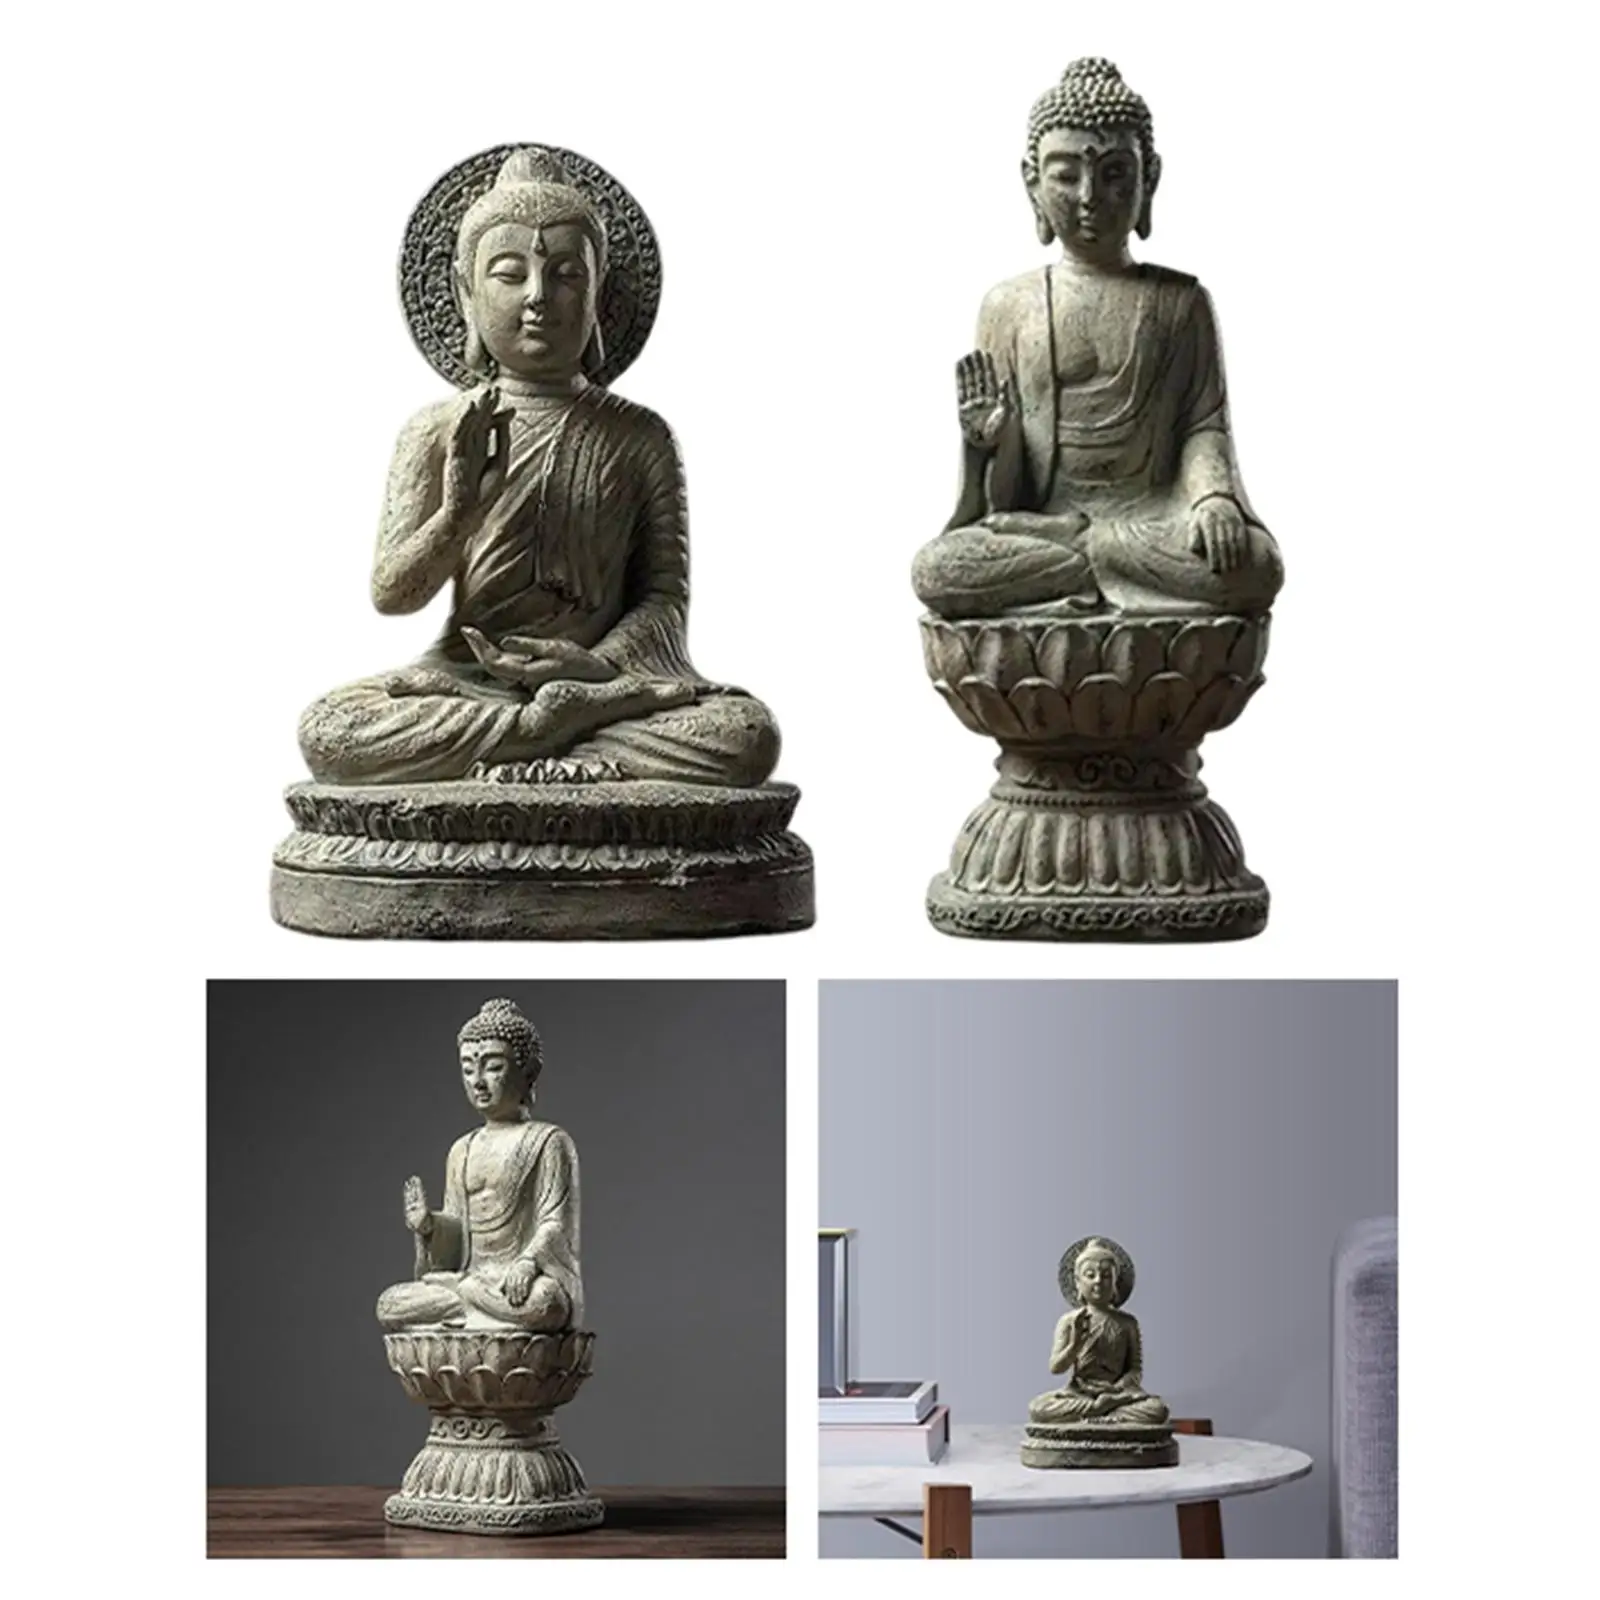 Resin Buddha Statue Figurine Enlightened One Sculpture Sitting Collection Small for Desk Home Decoration Ornament Crafts